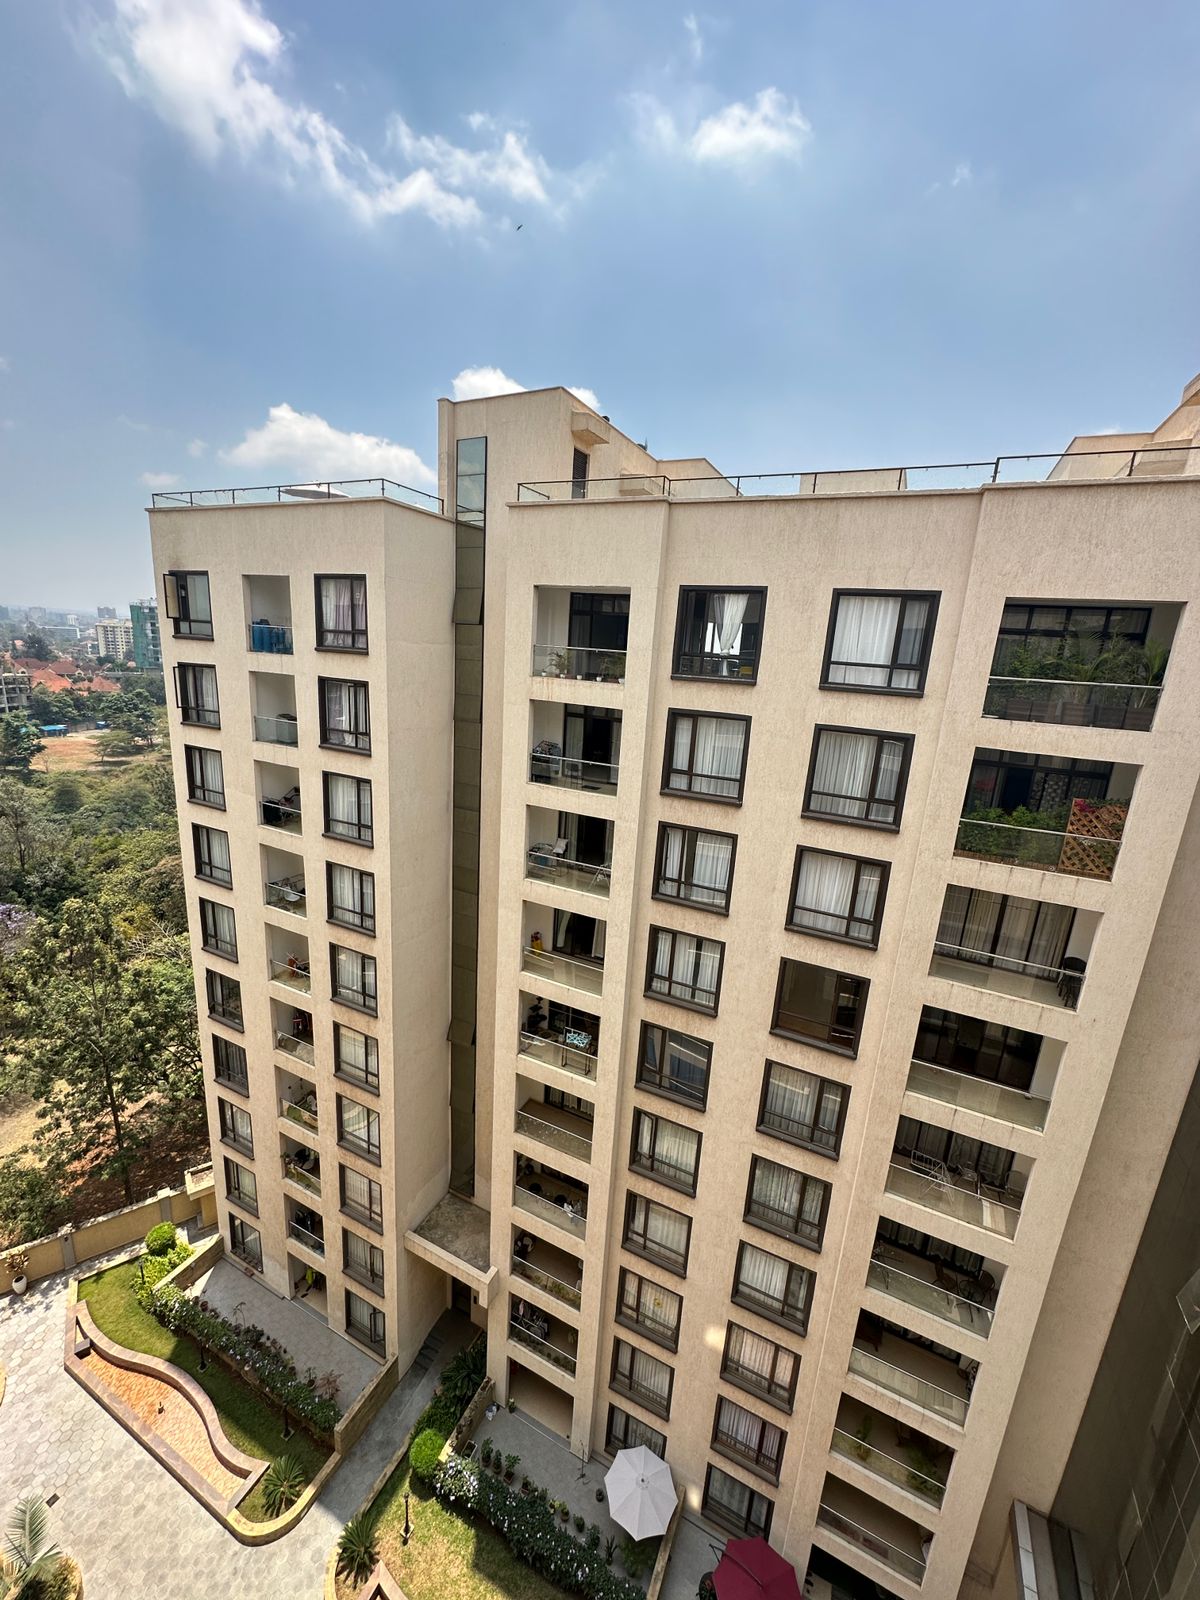 2 bedroom Apartments / Flats to Rent in Kilimani